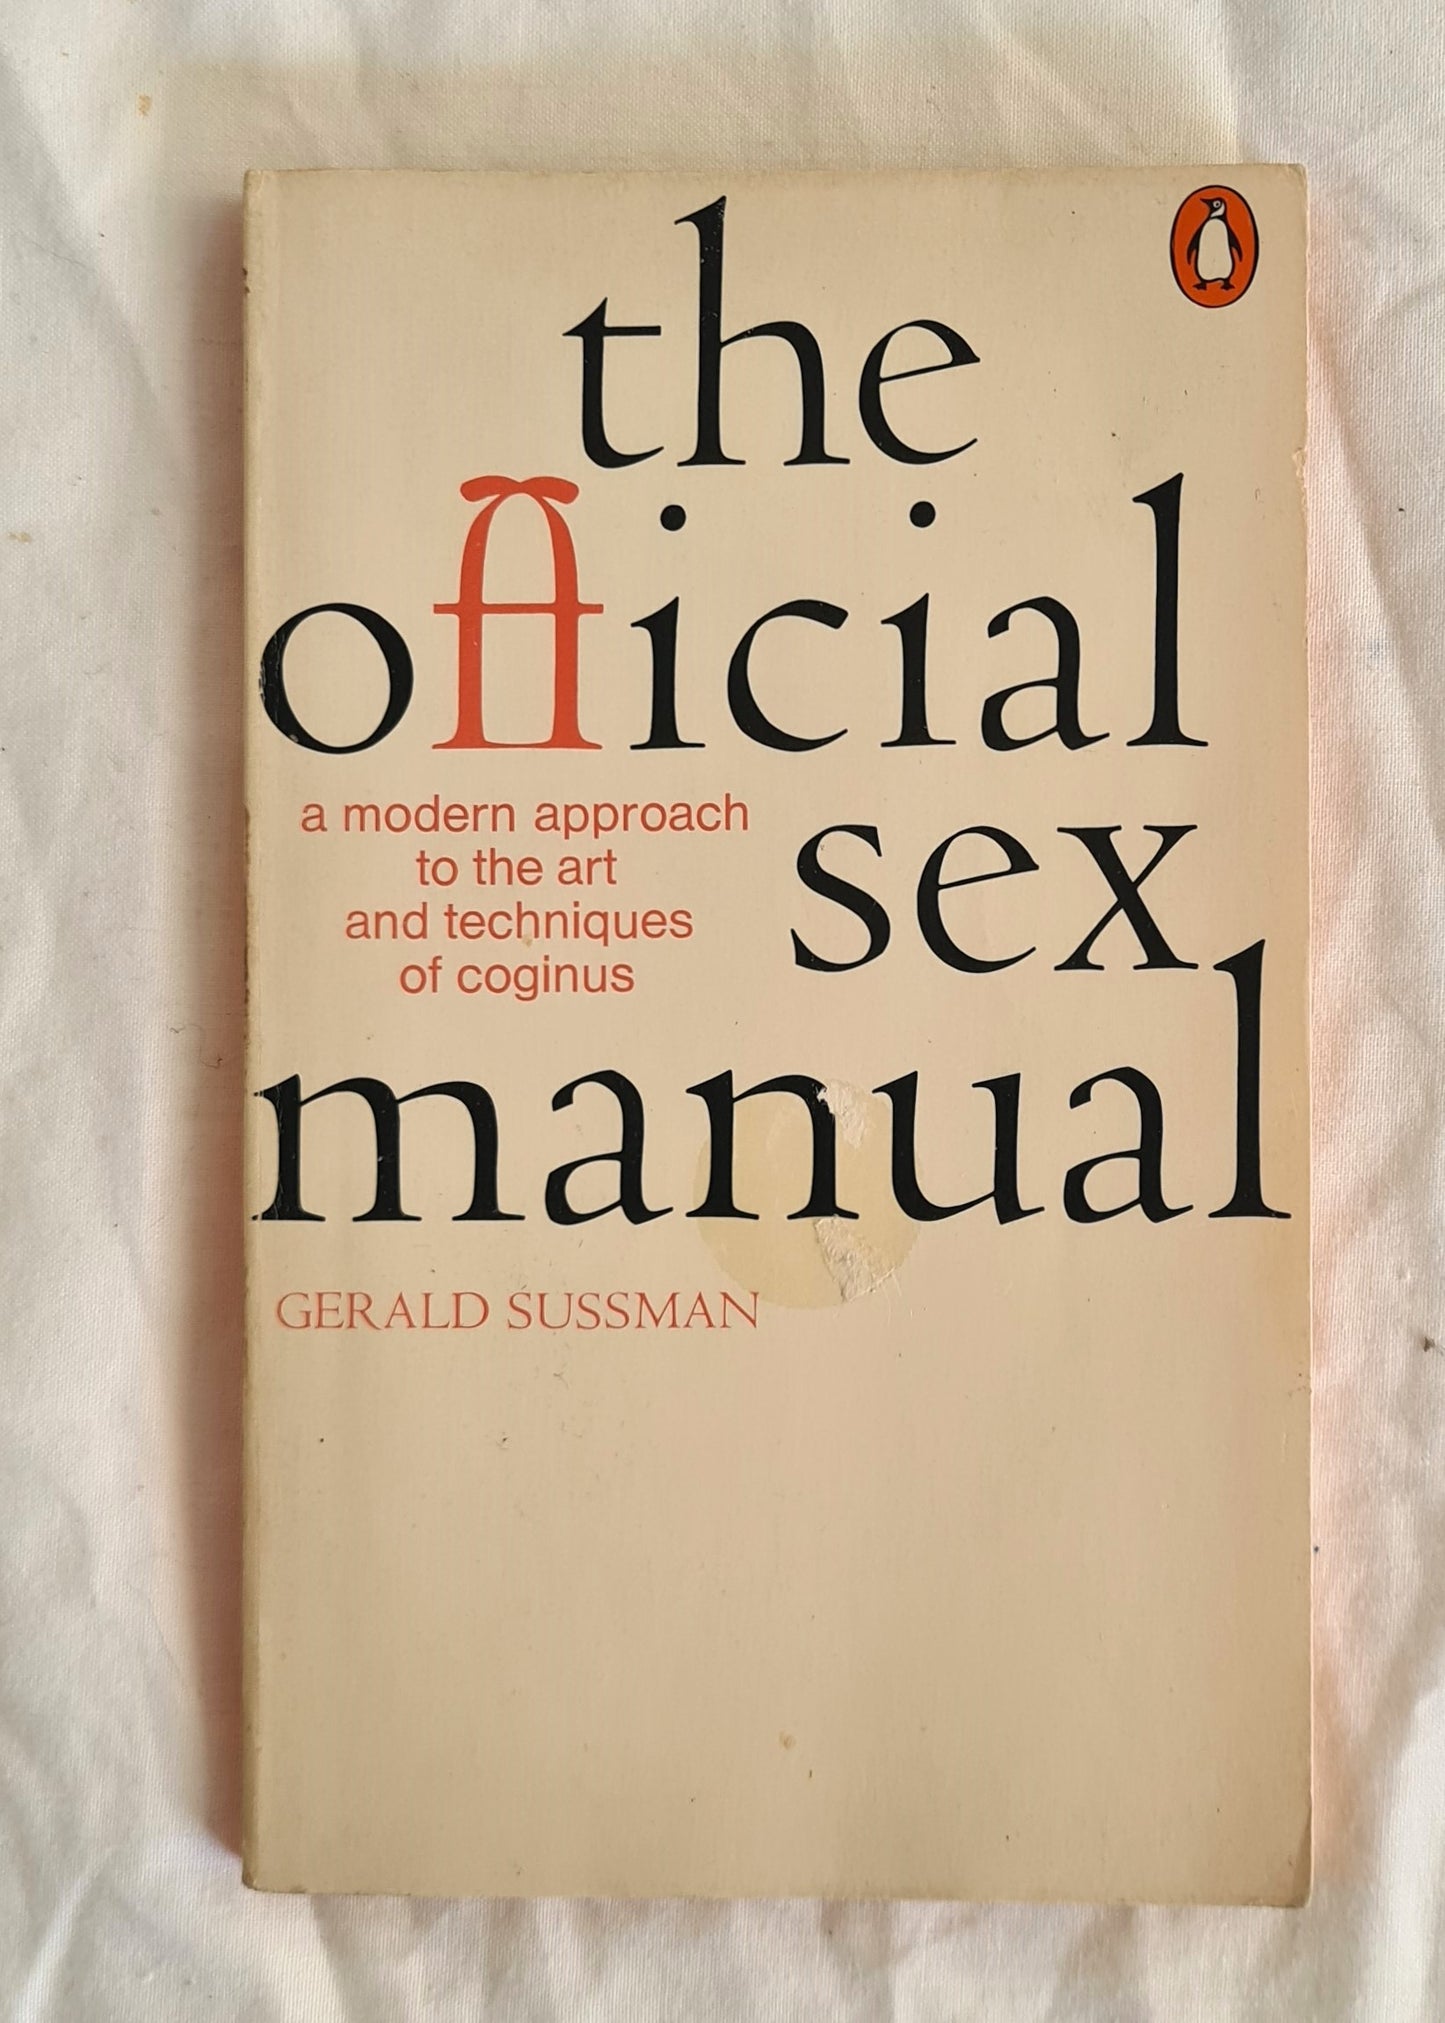 The Official Sex Manual  A modern approach to the art and techniques of coginus  by Gerald Sussman  illustrated by Sam Salcut